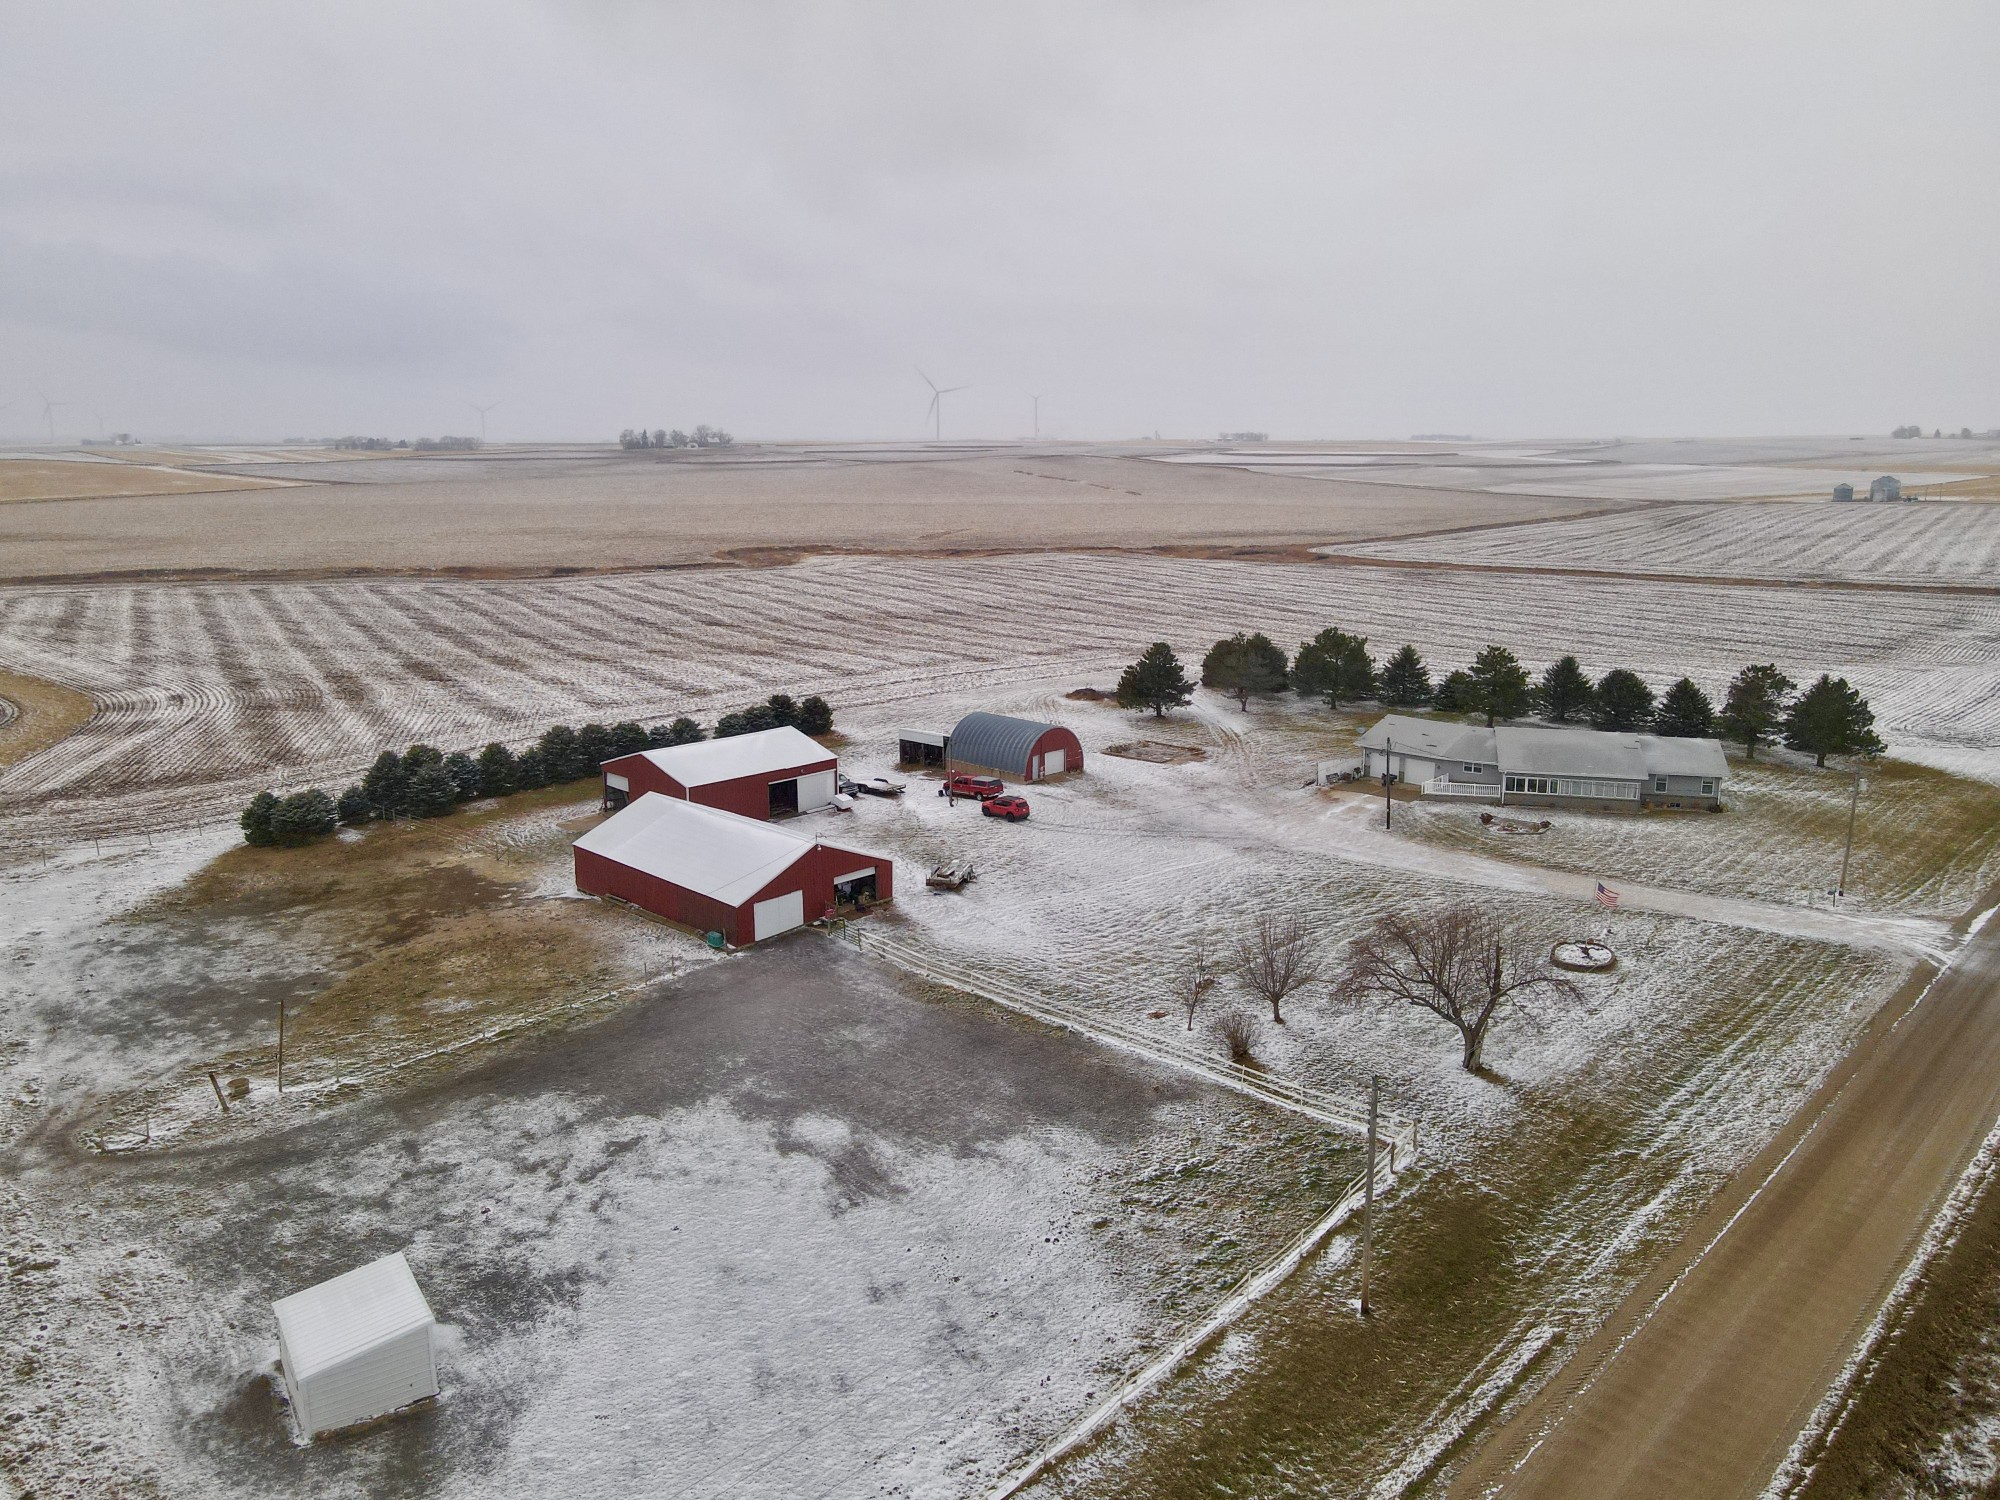 Aerial View of Acreage
3.75 Acres
Ranch Home / Outbuildings